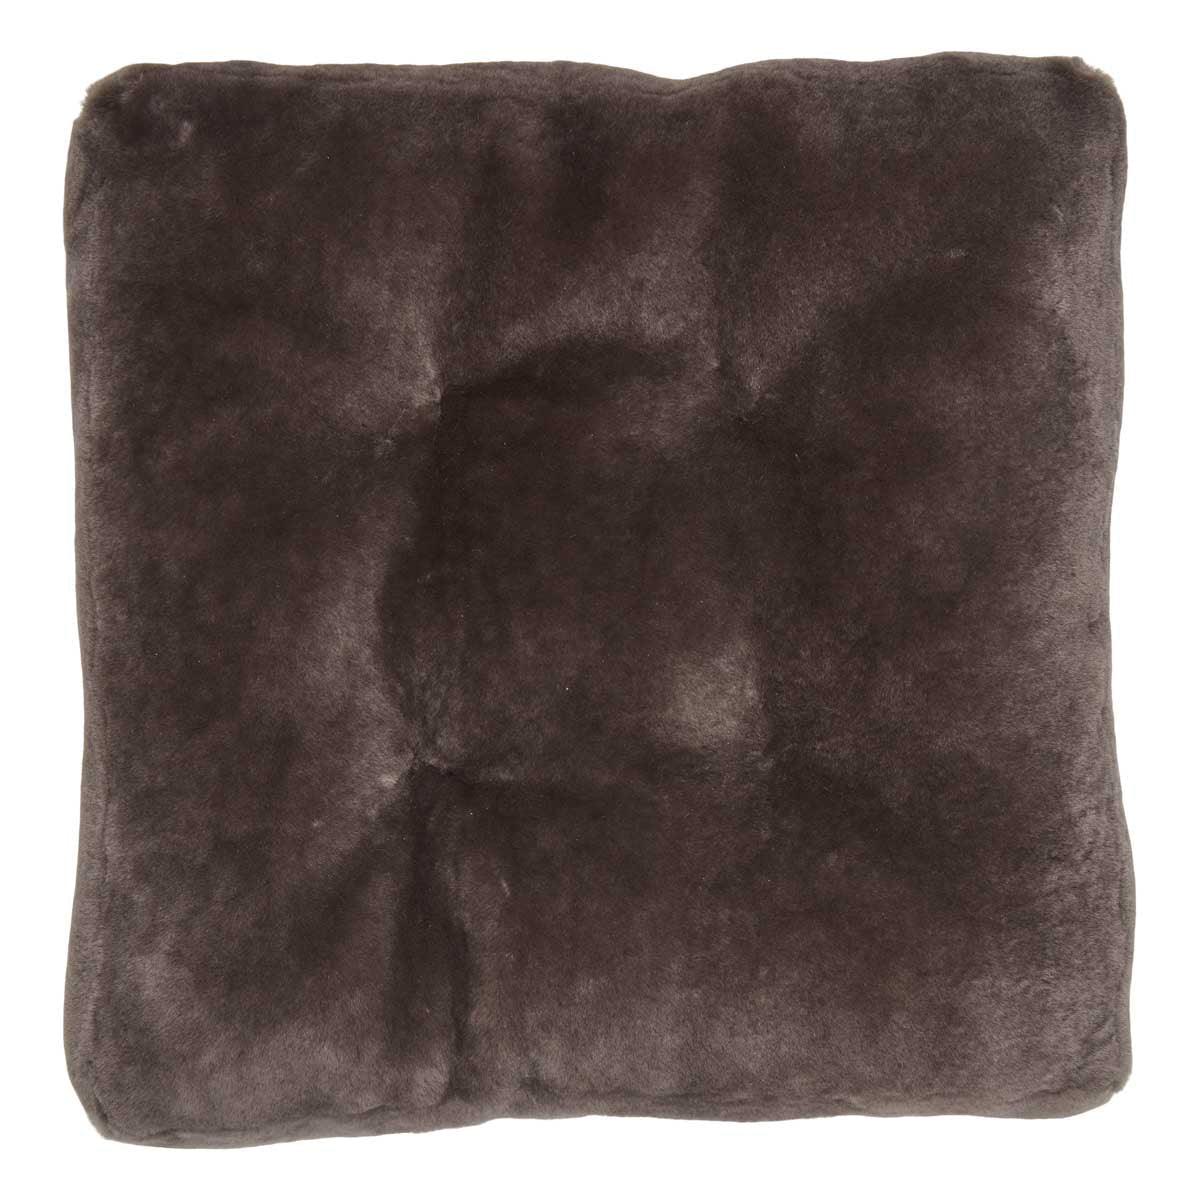 Seat Cover | 45x45x5 cm. | New Zealand Sheepskin | Moccasin | Calf Leather Backing - Naturescollection.eu